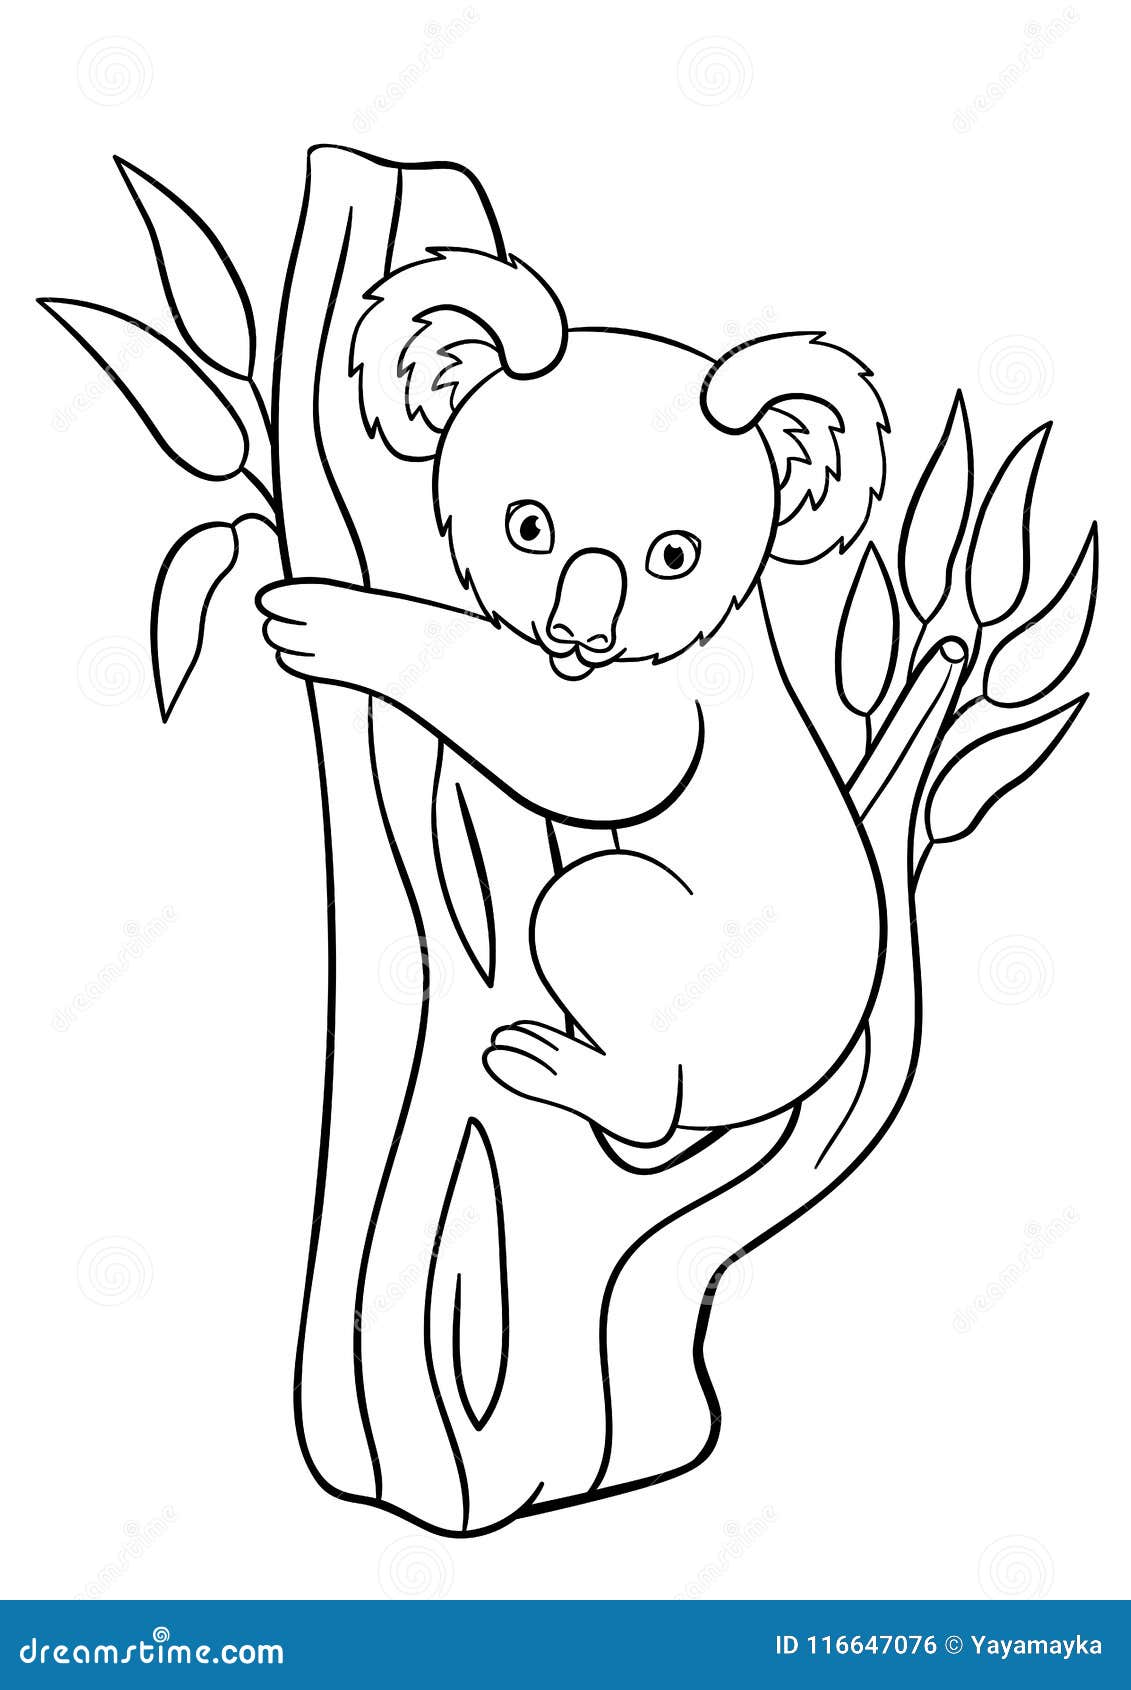 Coloring Pages. Little Cute Baby Koala Smiles. Stock Vector ...